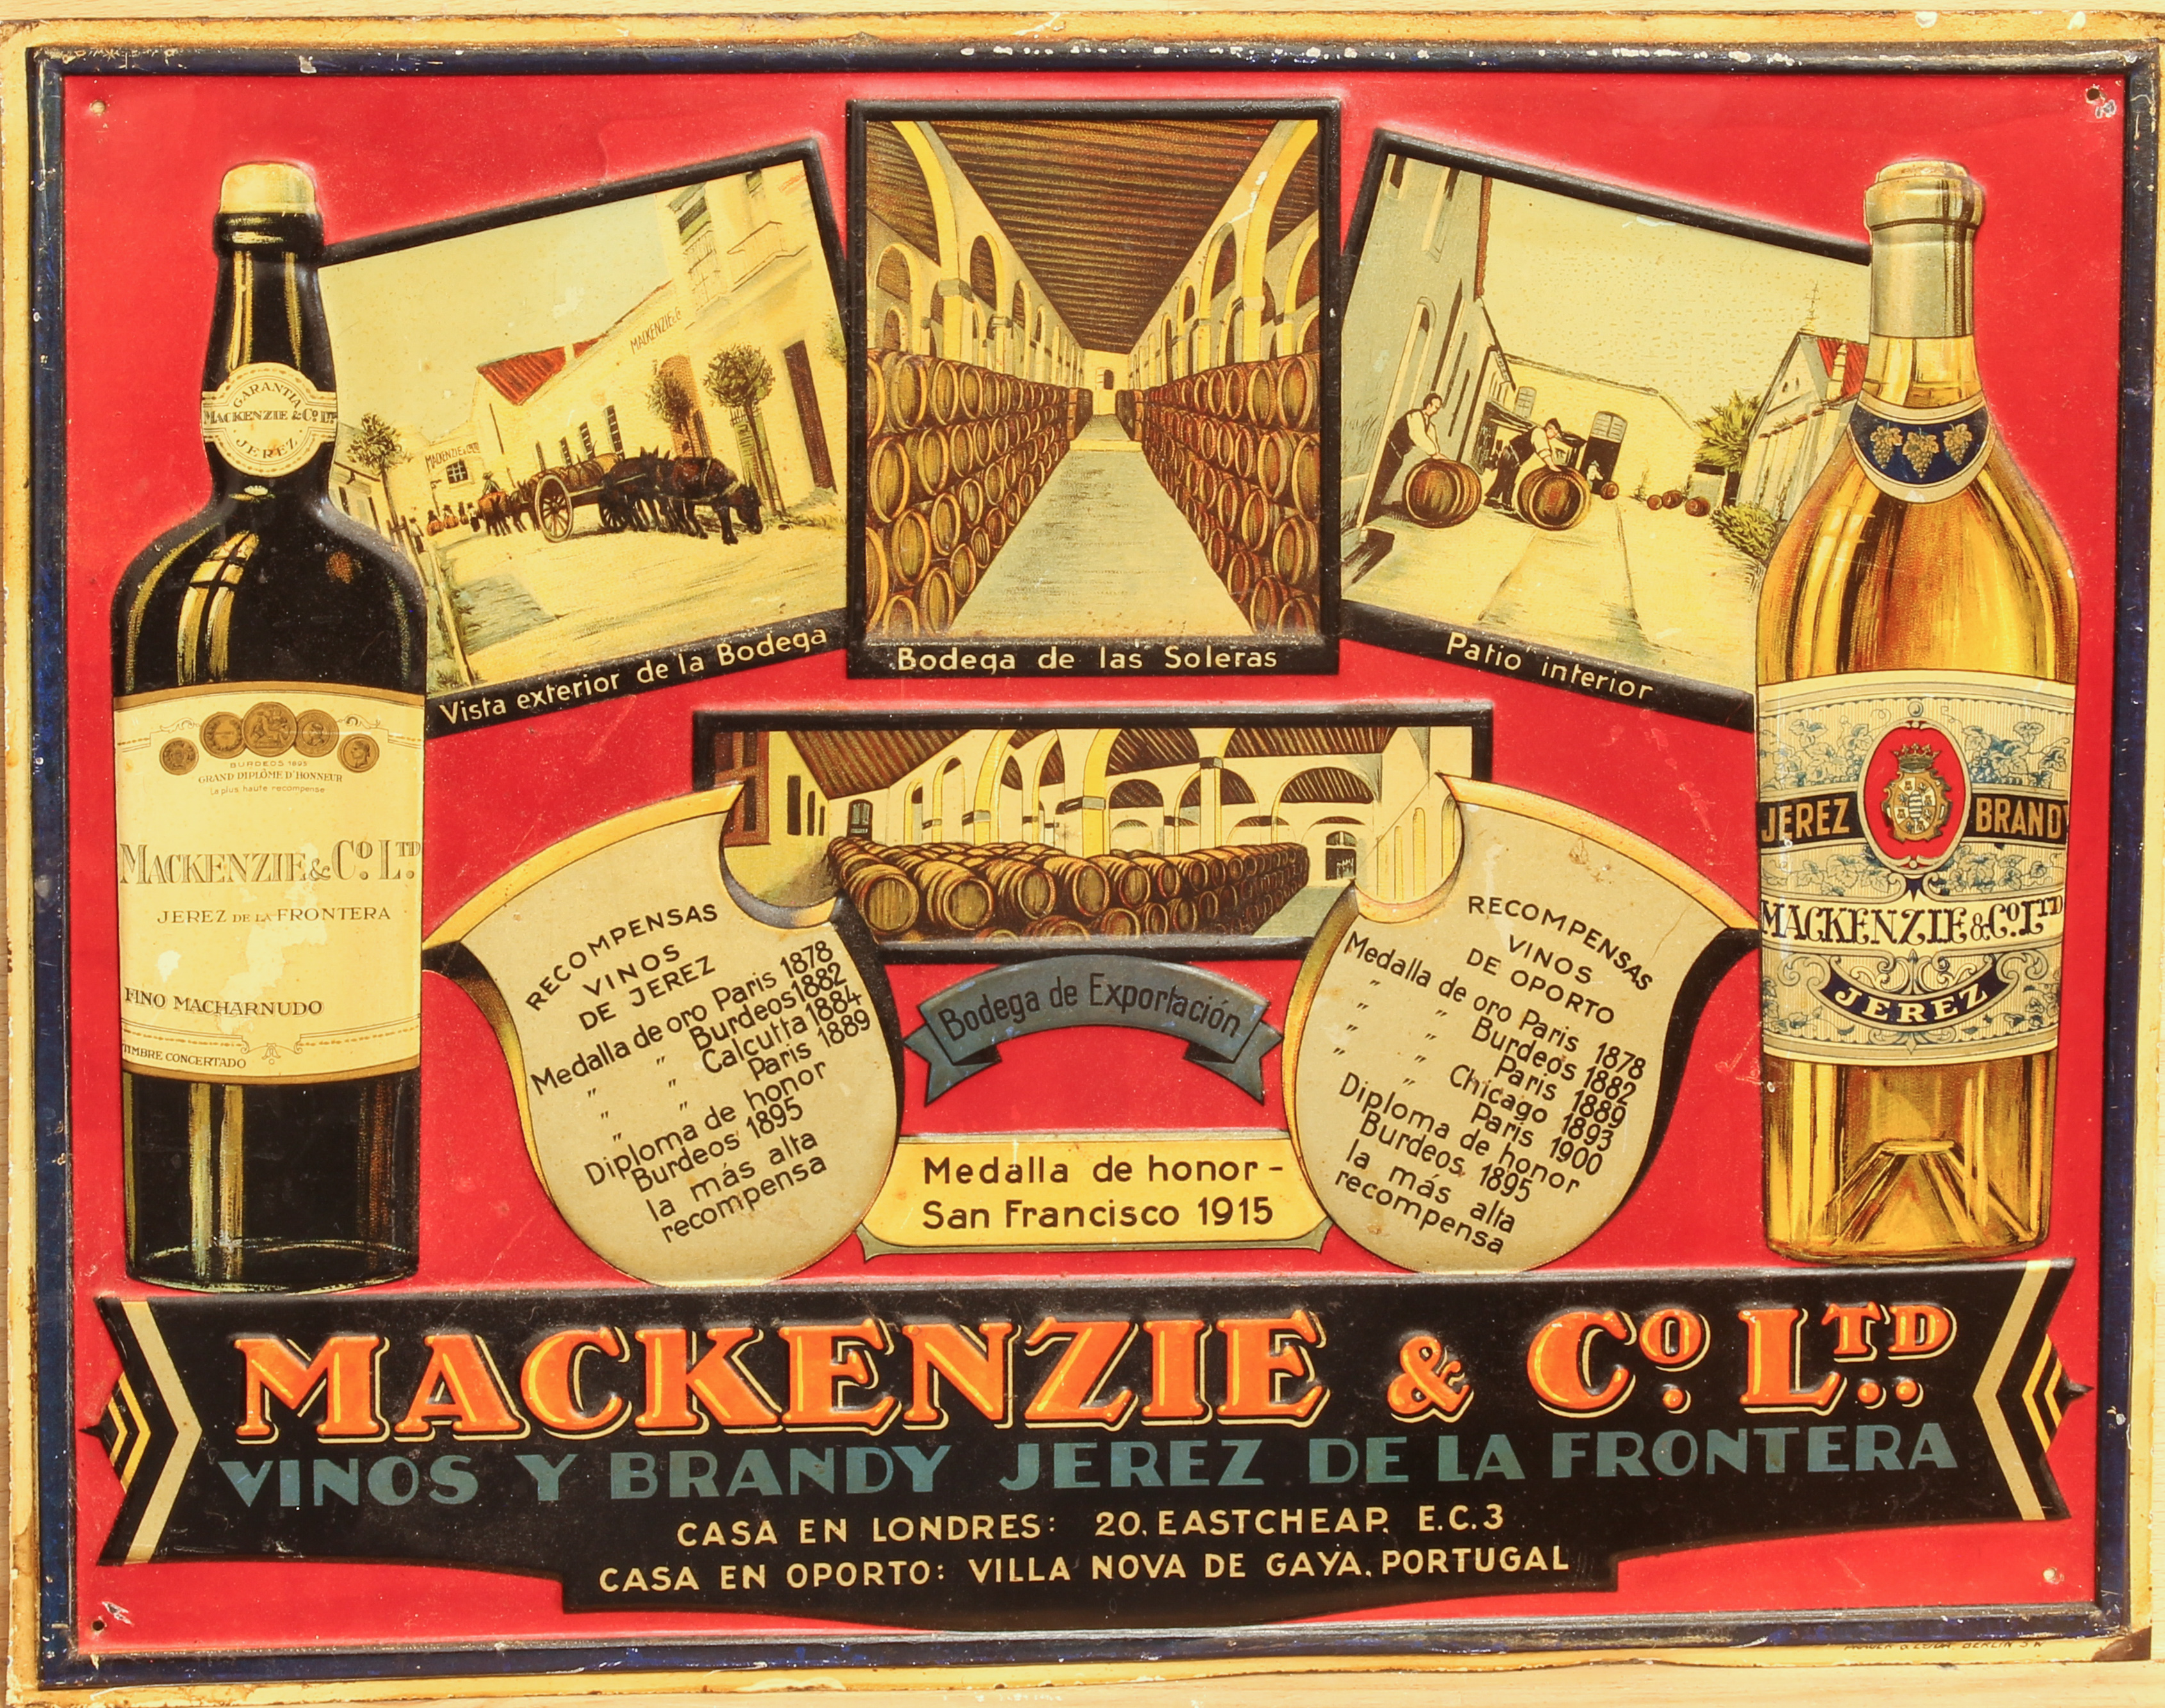 A vintage pressed lithographed tin advertising sign for Mackenzie & Co. Ltd. wine and brandy -